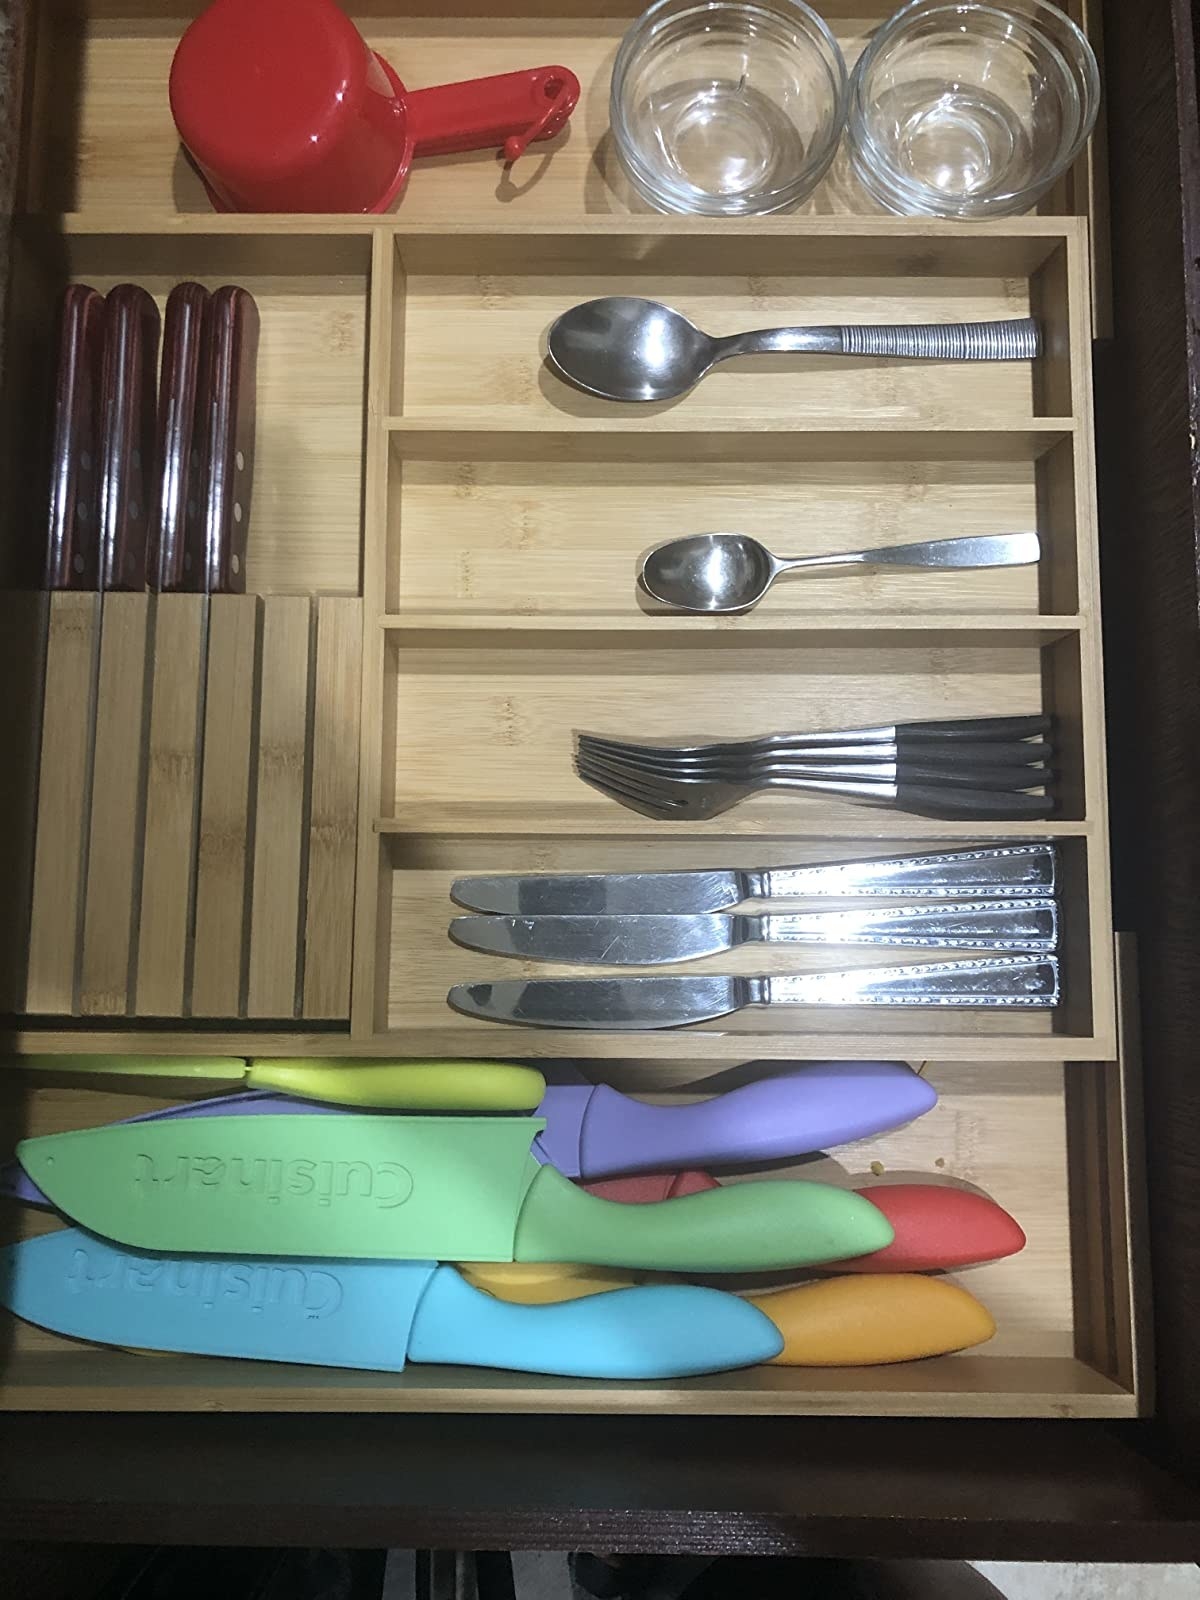 The knives in a drawer